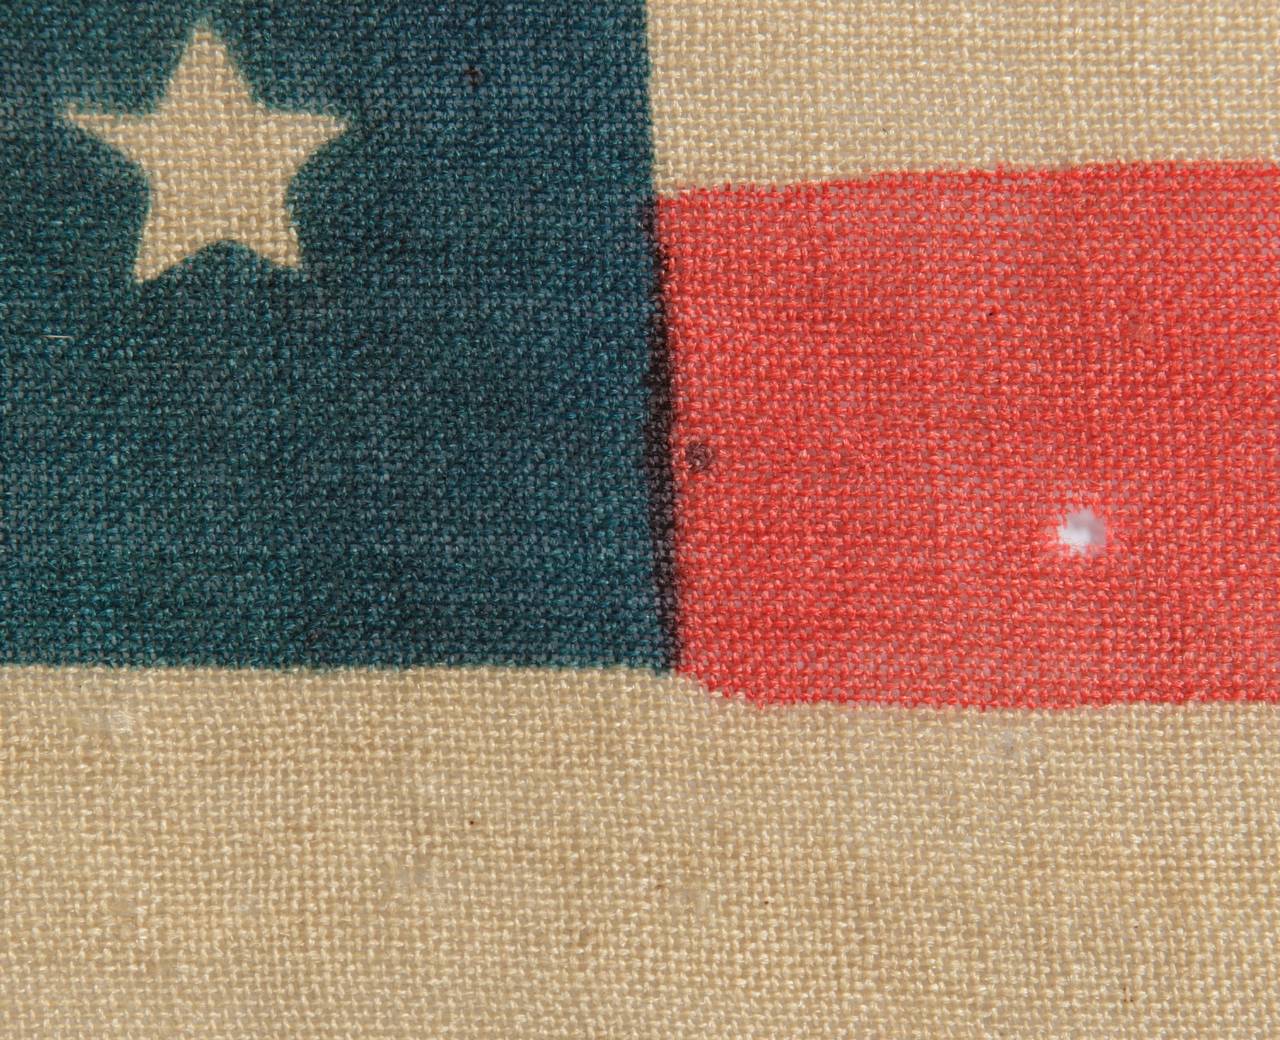 Early 20th Century 46 Star U.S Military Camp Color, Press-Dyed Wool Flag